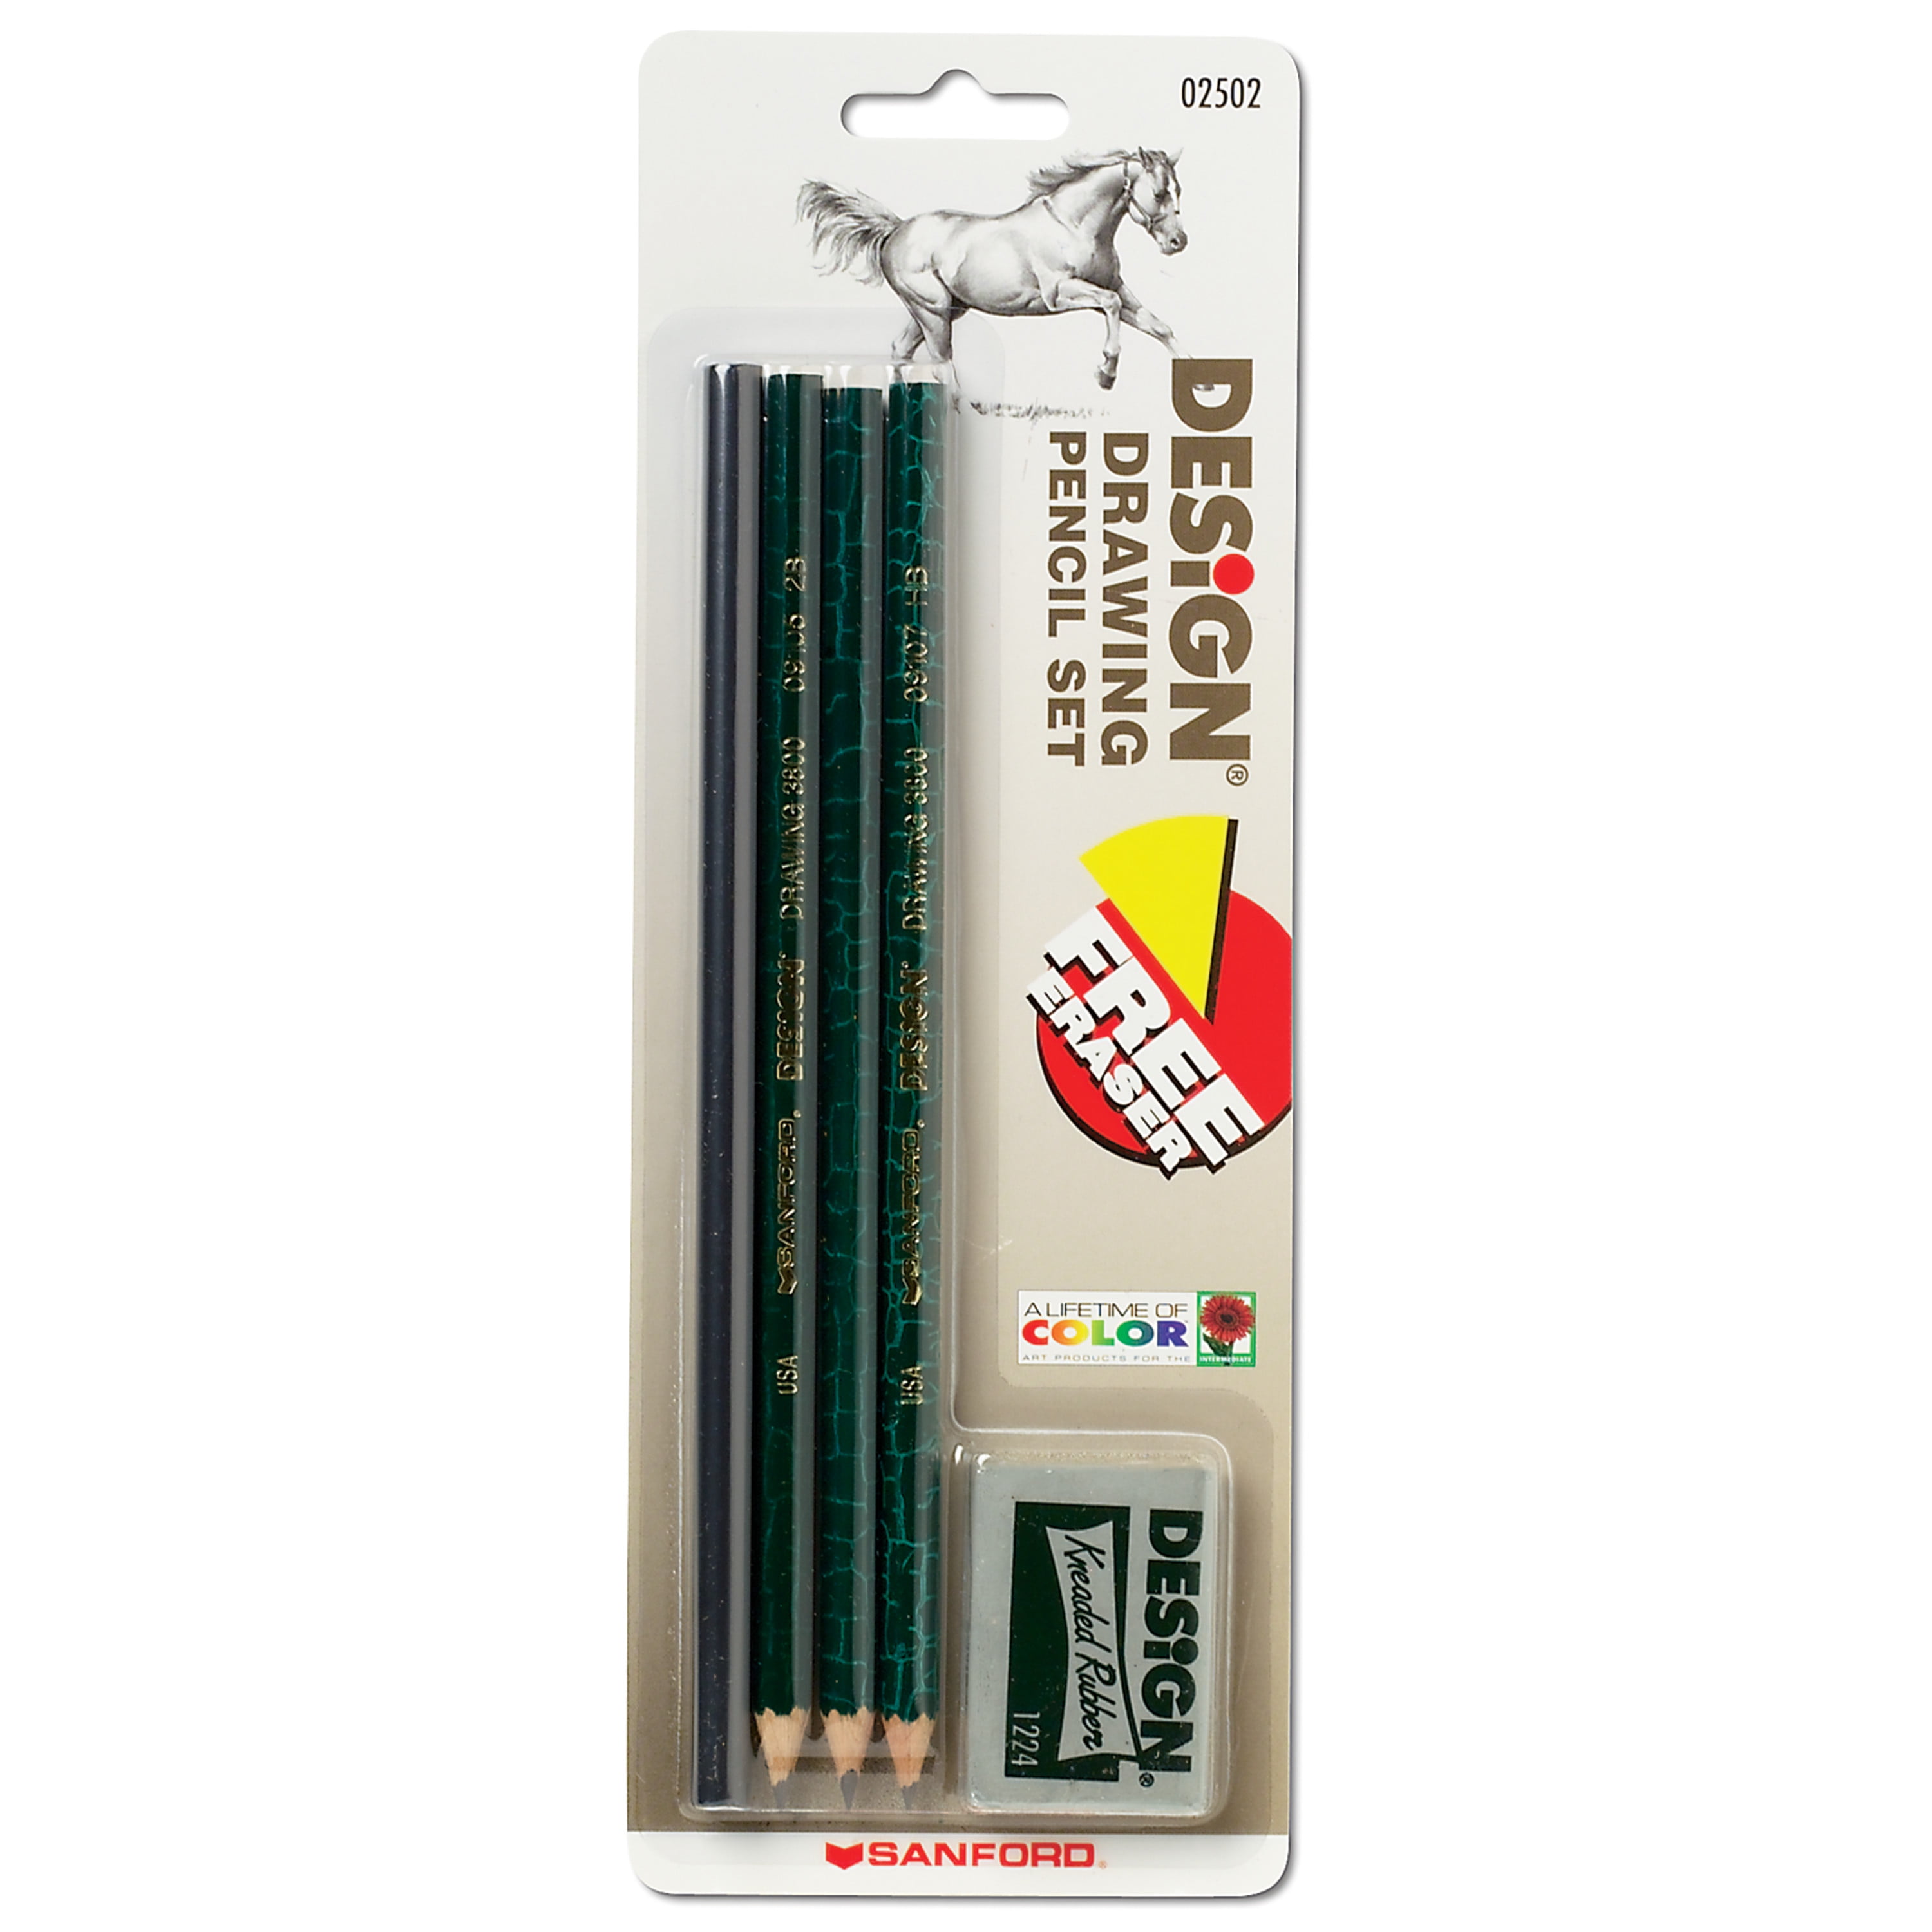 Scholar Graphite Pencil Set, 2 mm, Assorted Lead Hardness Ratings